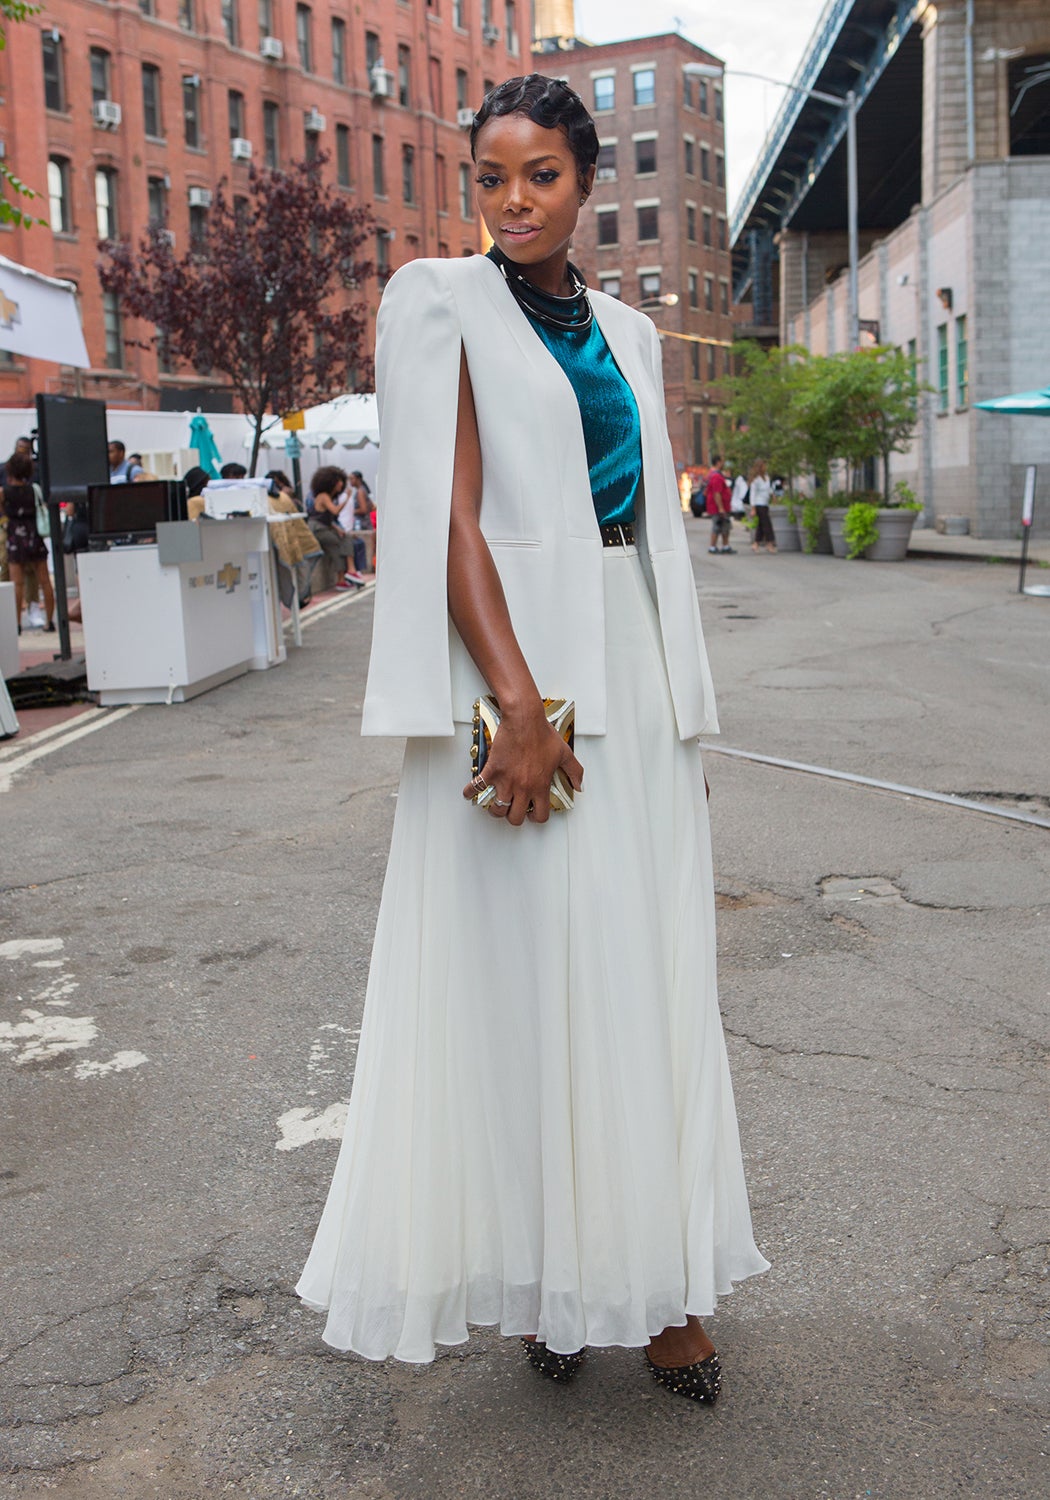 Relive Last Year's ESSENCE Street Style Block Party!
